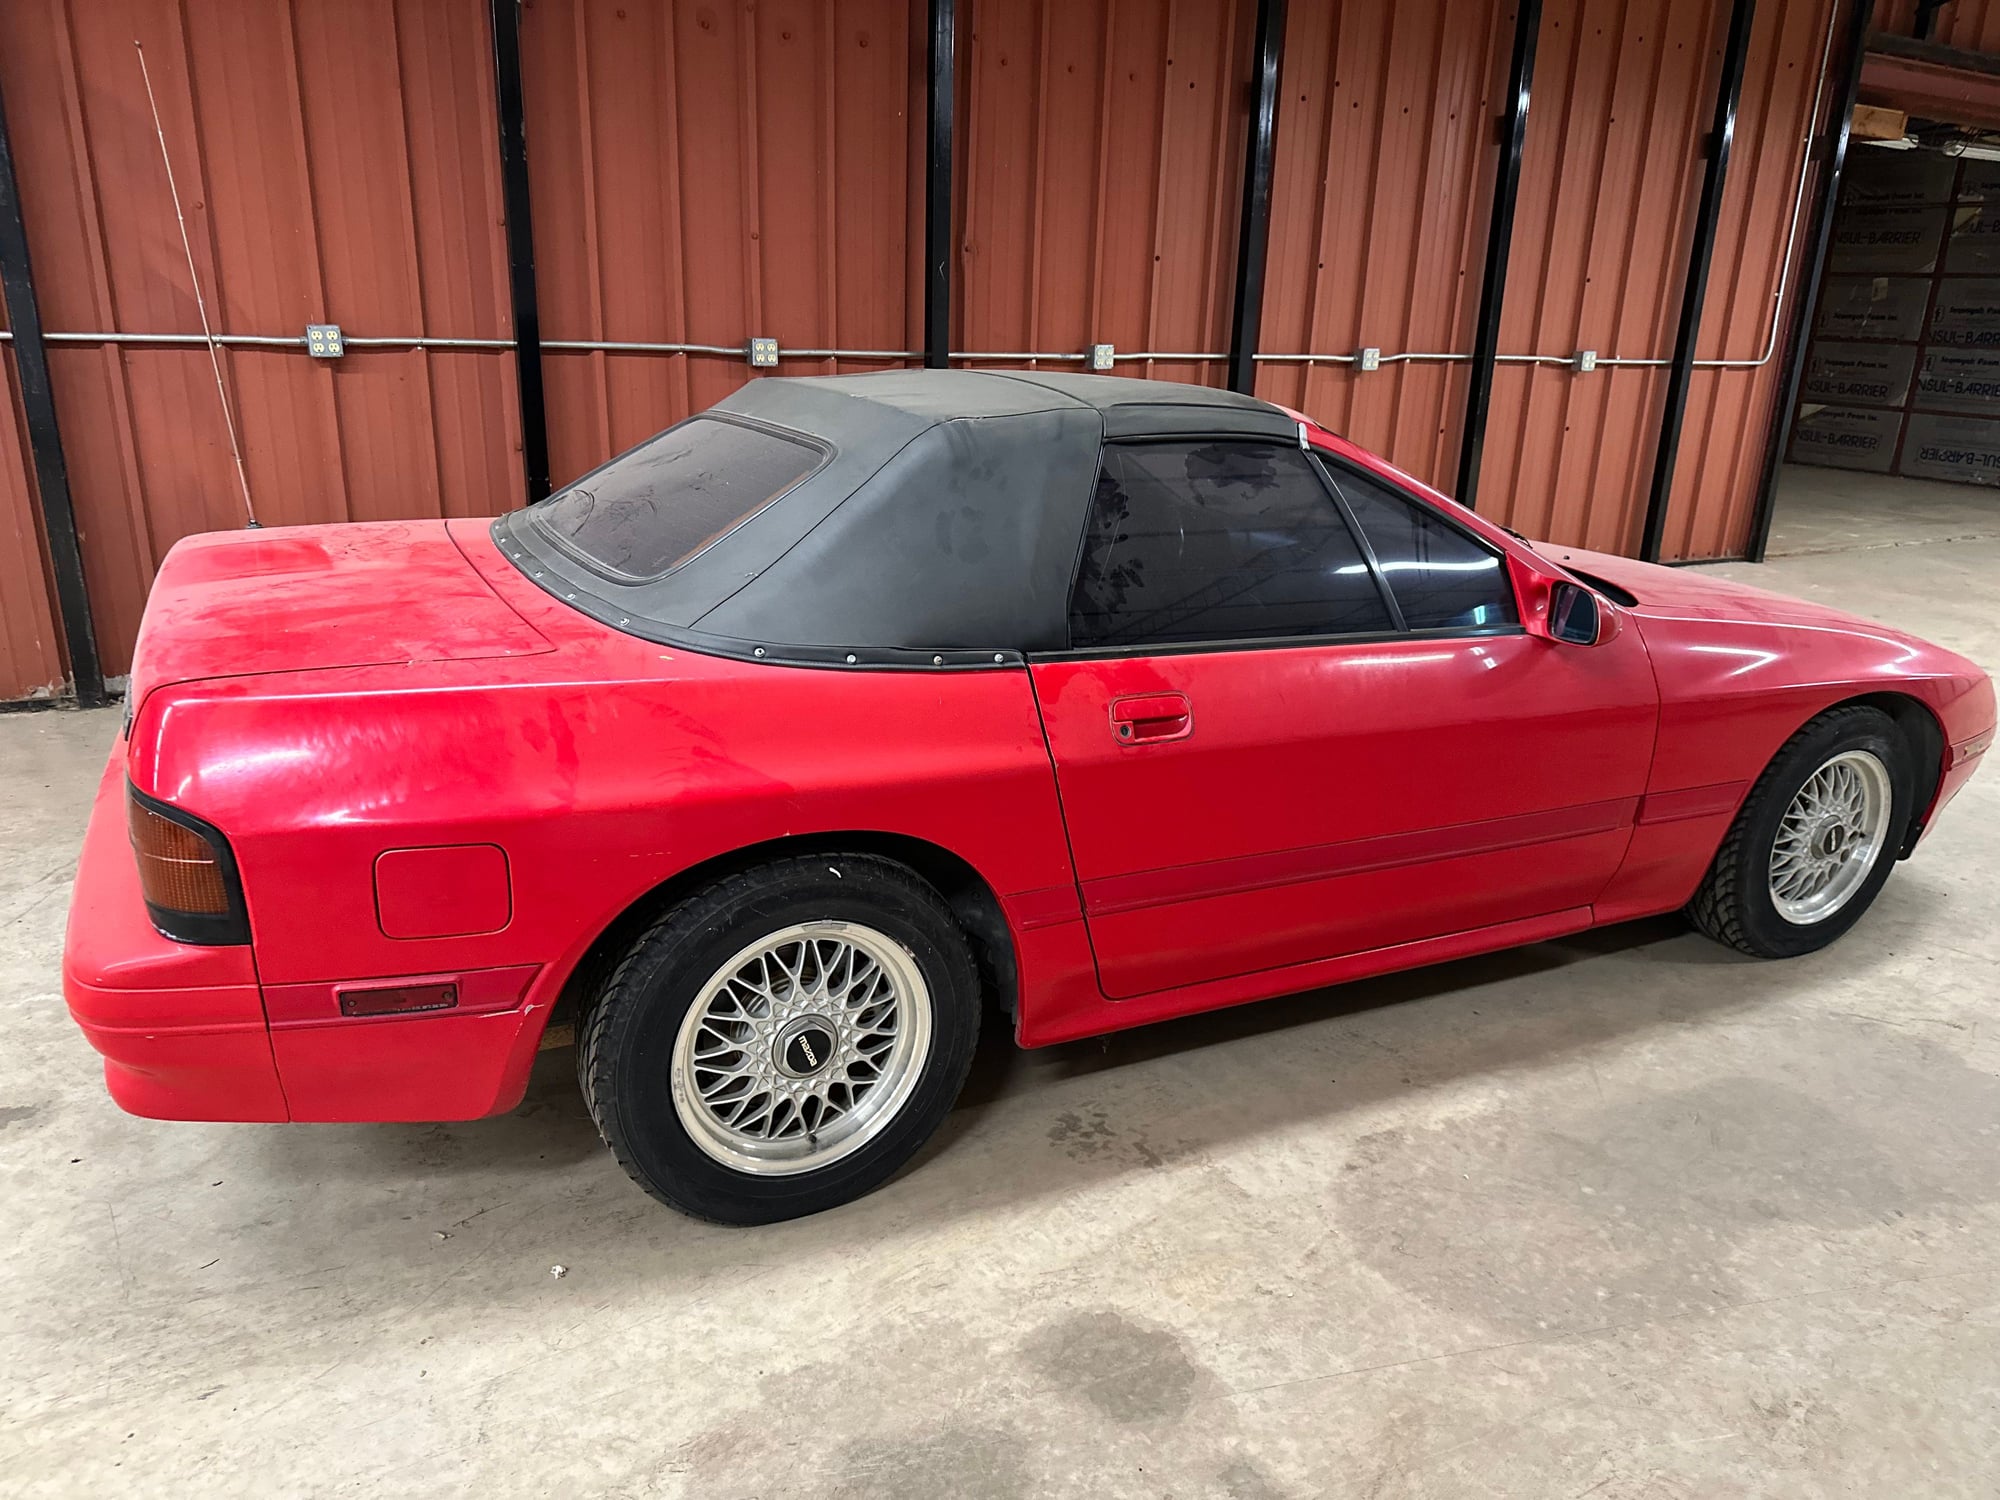 1990 Mazda RX-7 - 1990 rx-7  for sale - Used - VIN JMIFC3529L0711892 - 162,000 Miles - Other - 2WD - Manual - Convertible - Red - Norman, OK 73072, United States